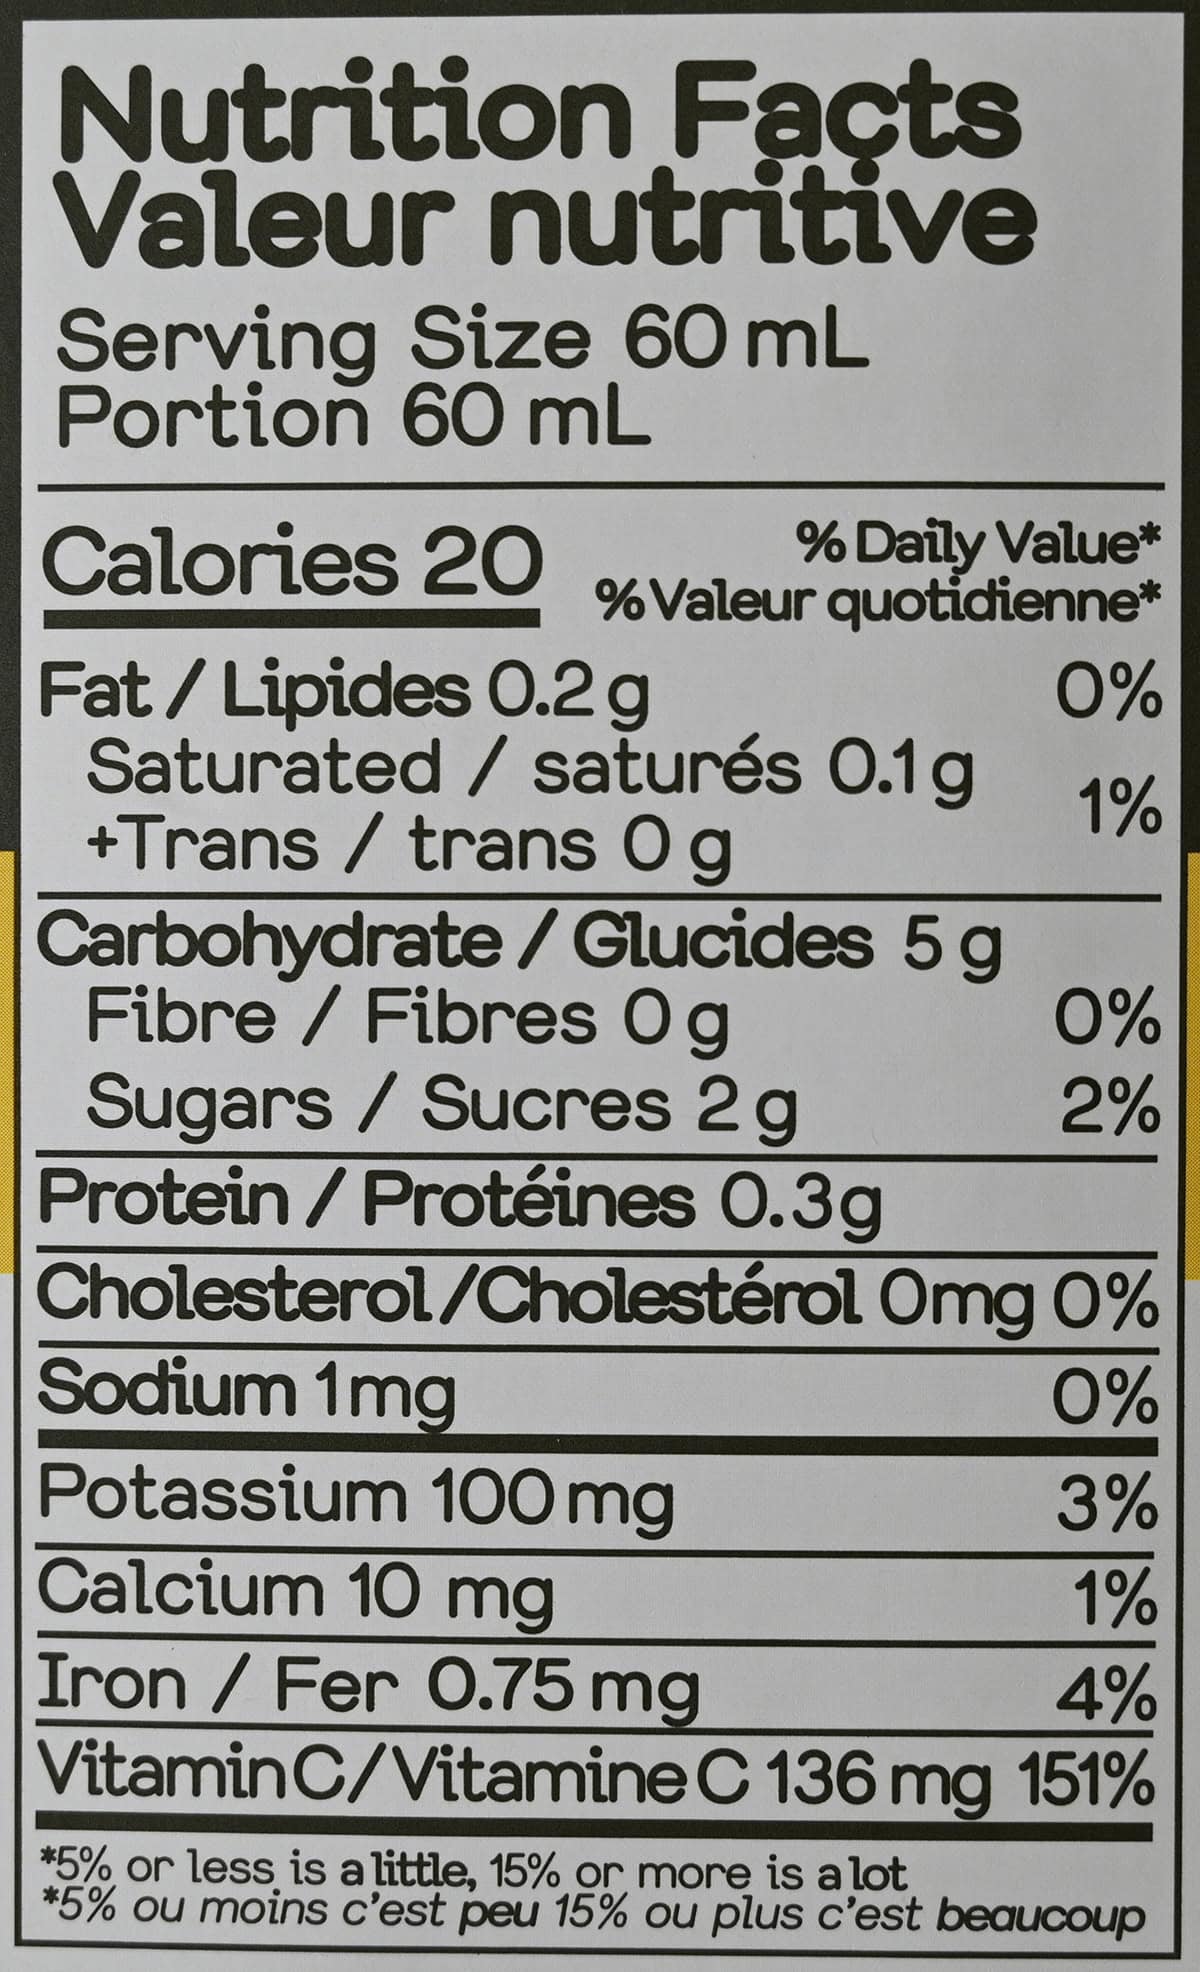 Image of the nutrition facts for the ginger defence from the back of the box.